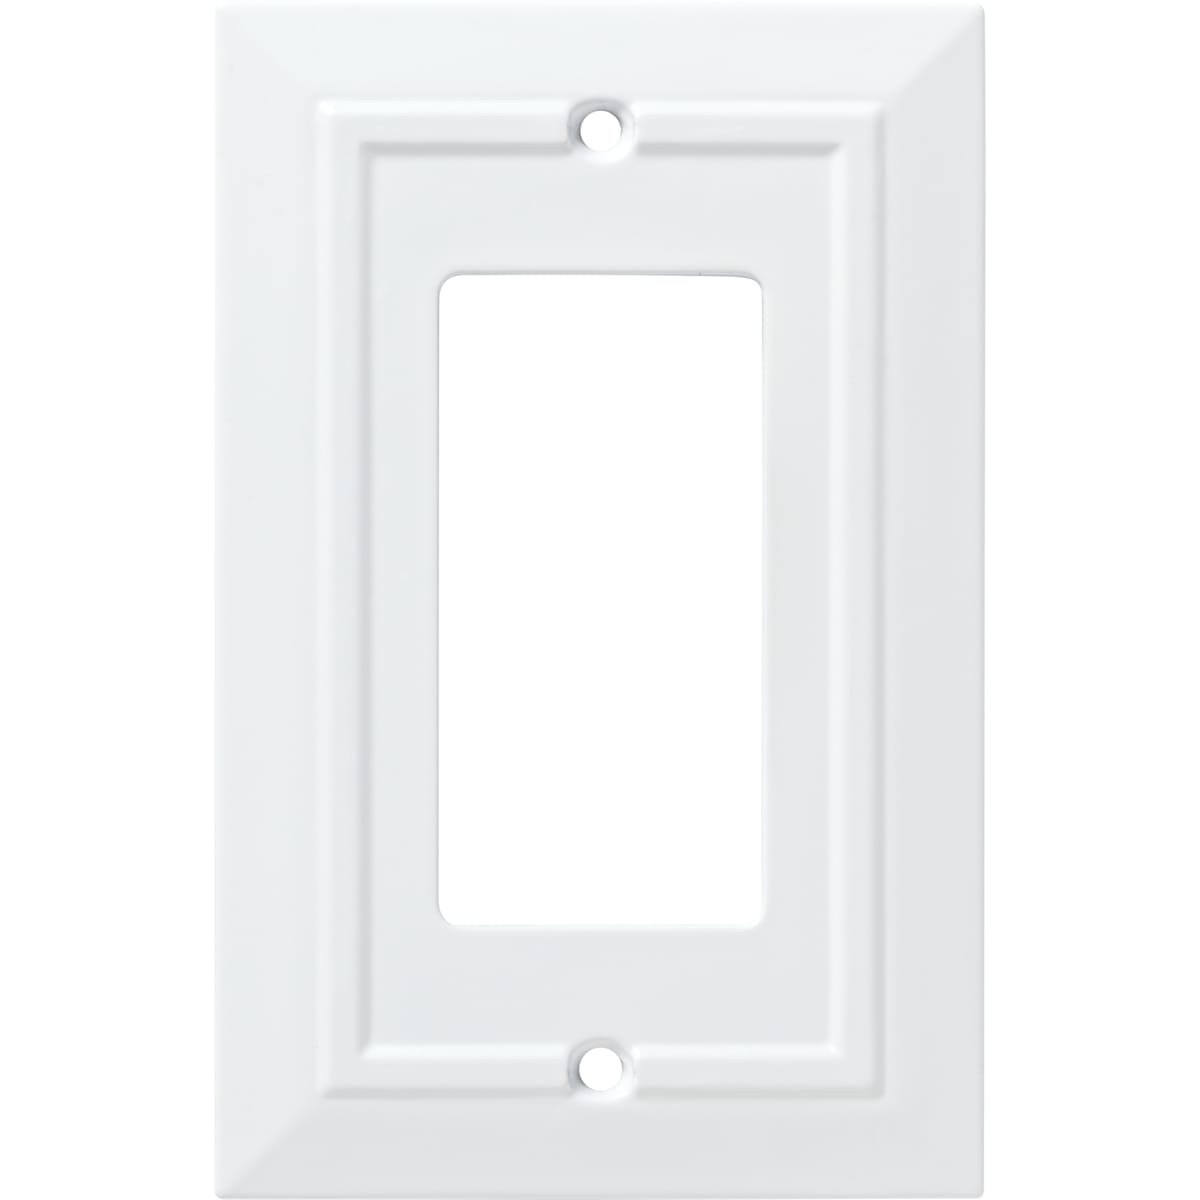 Screwless Wall Plate Depth Ring for Legrand Radiant 1 Gang